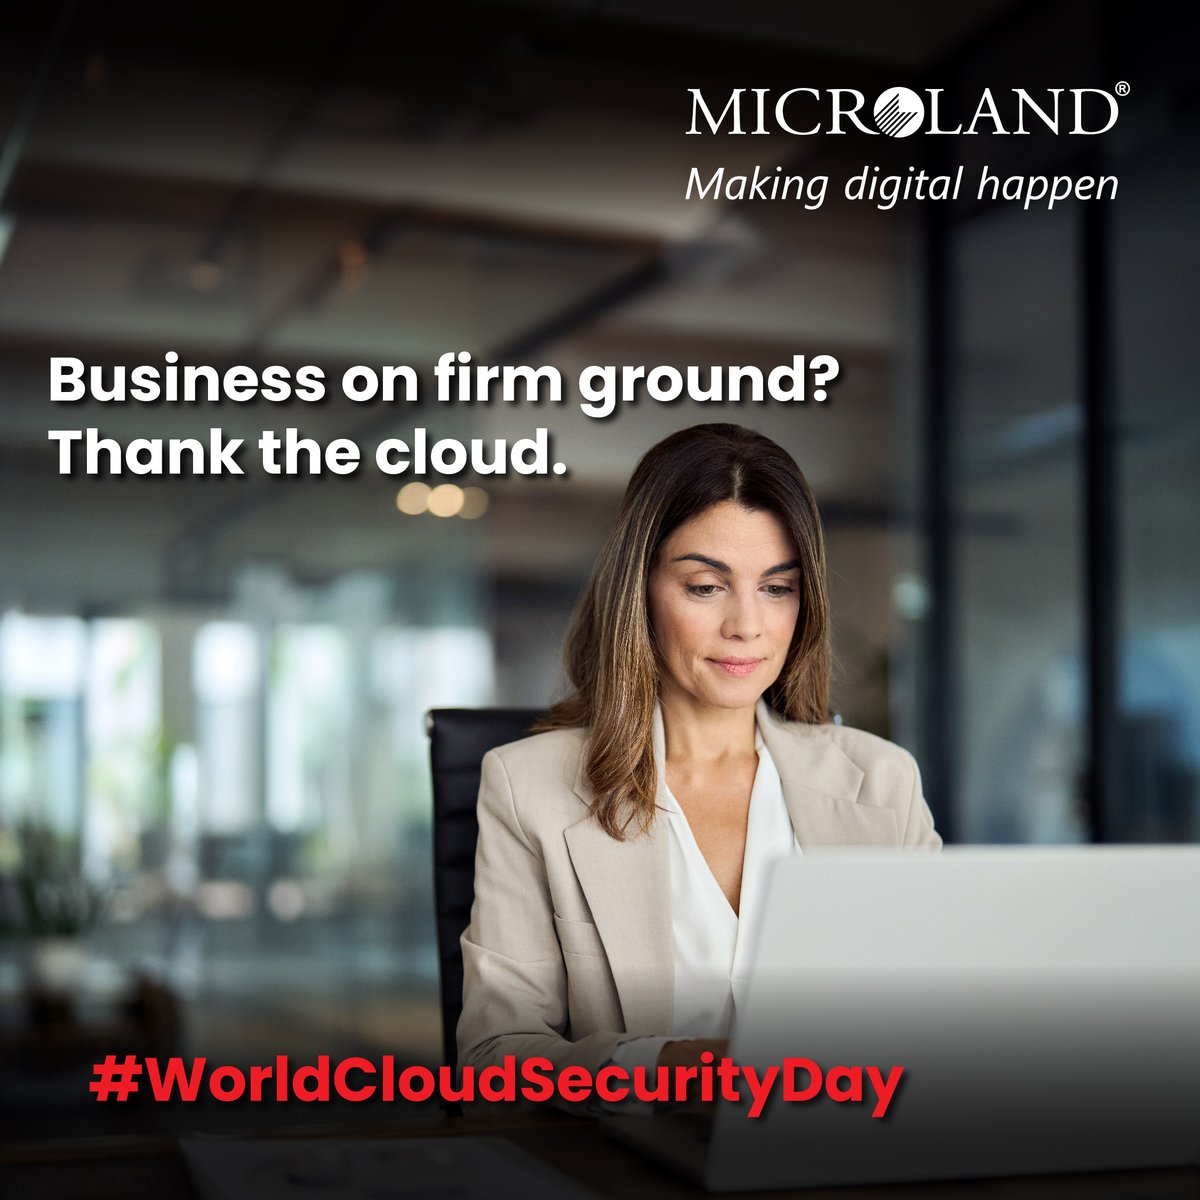 At Microland, we believe security is paramount, as evidenced in our cloud management services where security is a key component. We ensure that an enterprise is equipped to operate and deliver uninterrupted. #WorldCloudSecurityDay #CloudSecurity #CloudTechnology